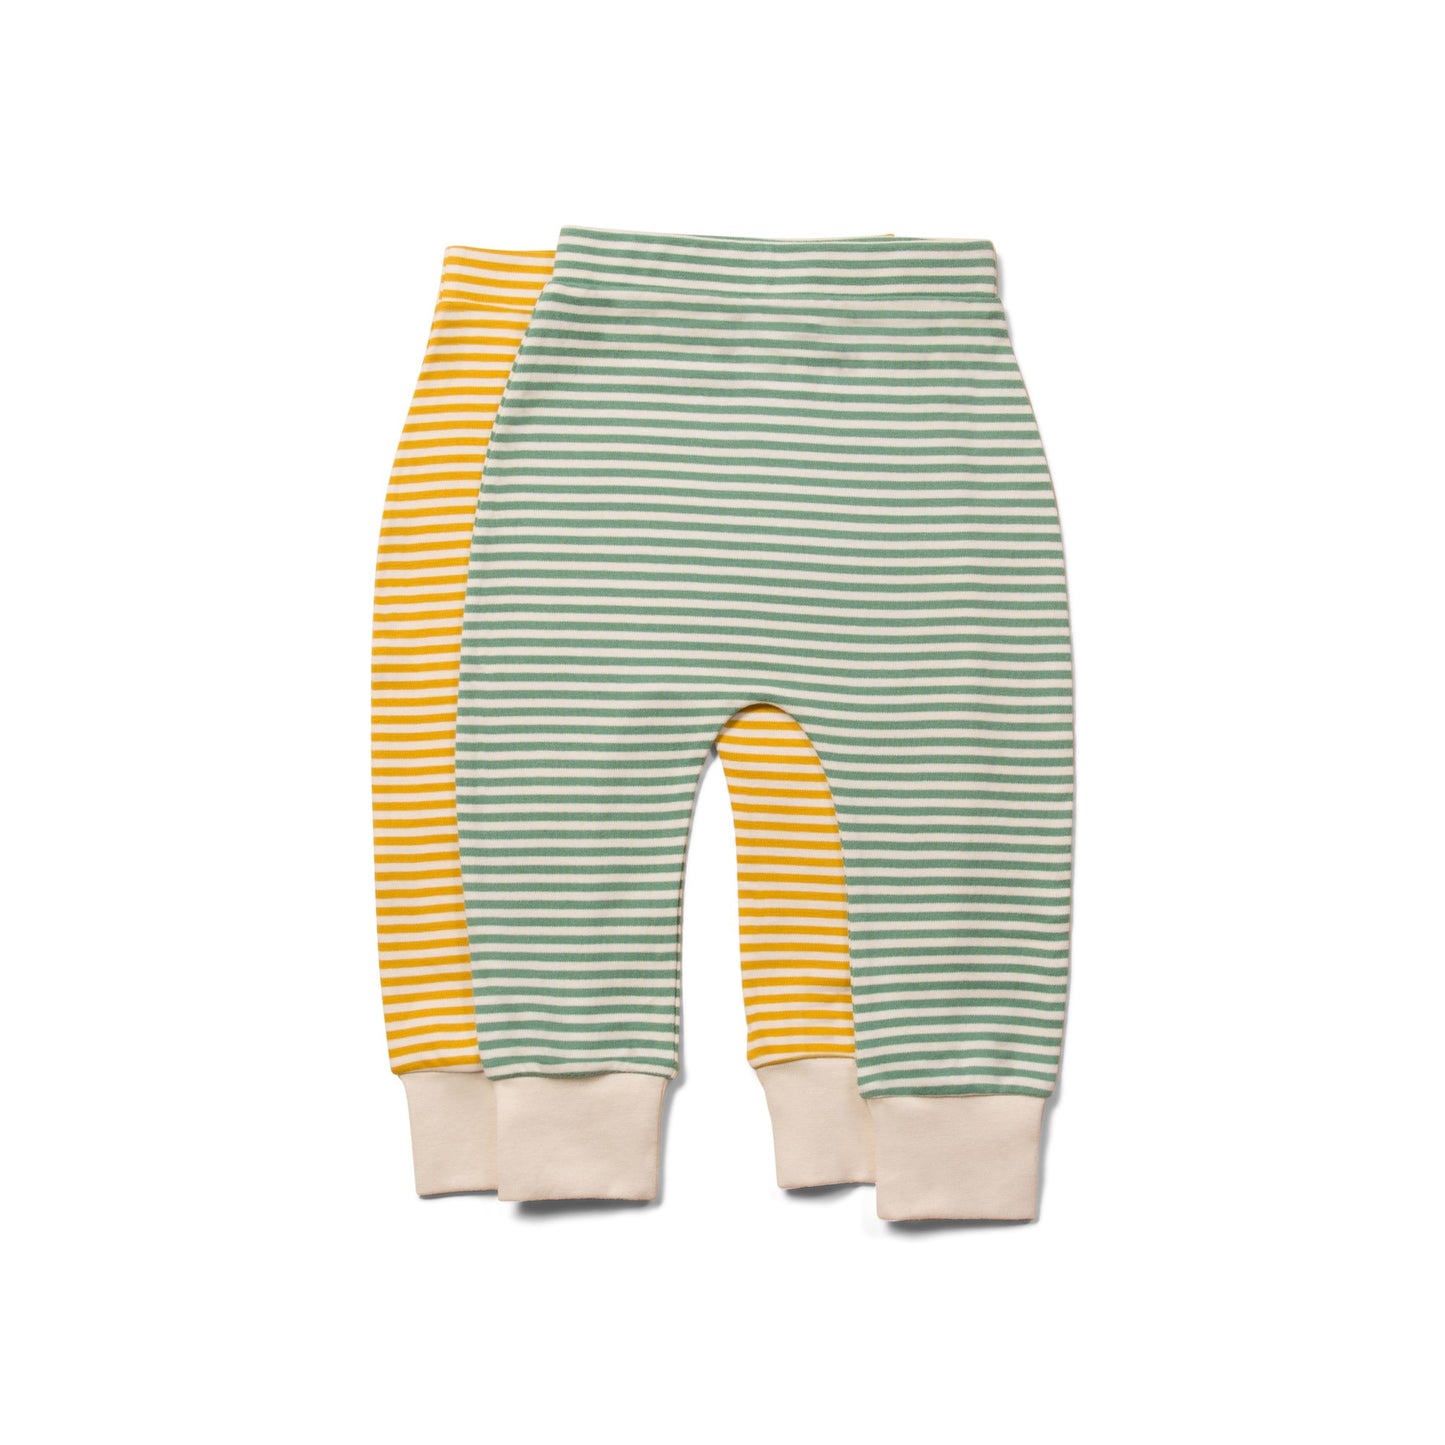 Gold and green striped wriggle bottoms - 2 pack